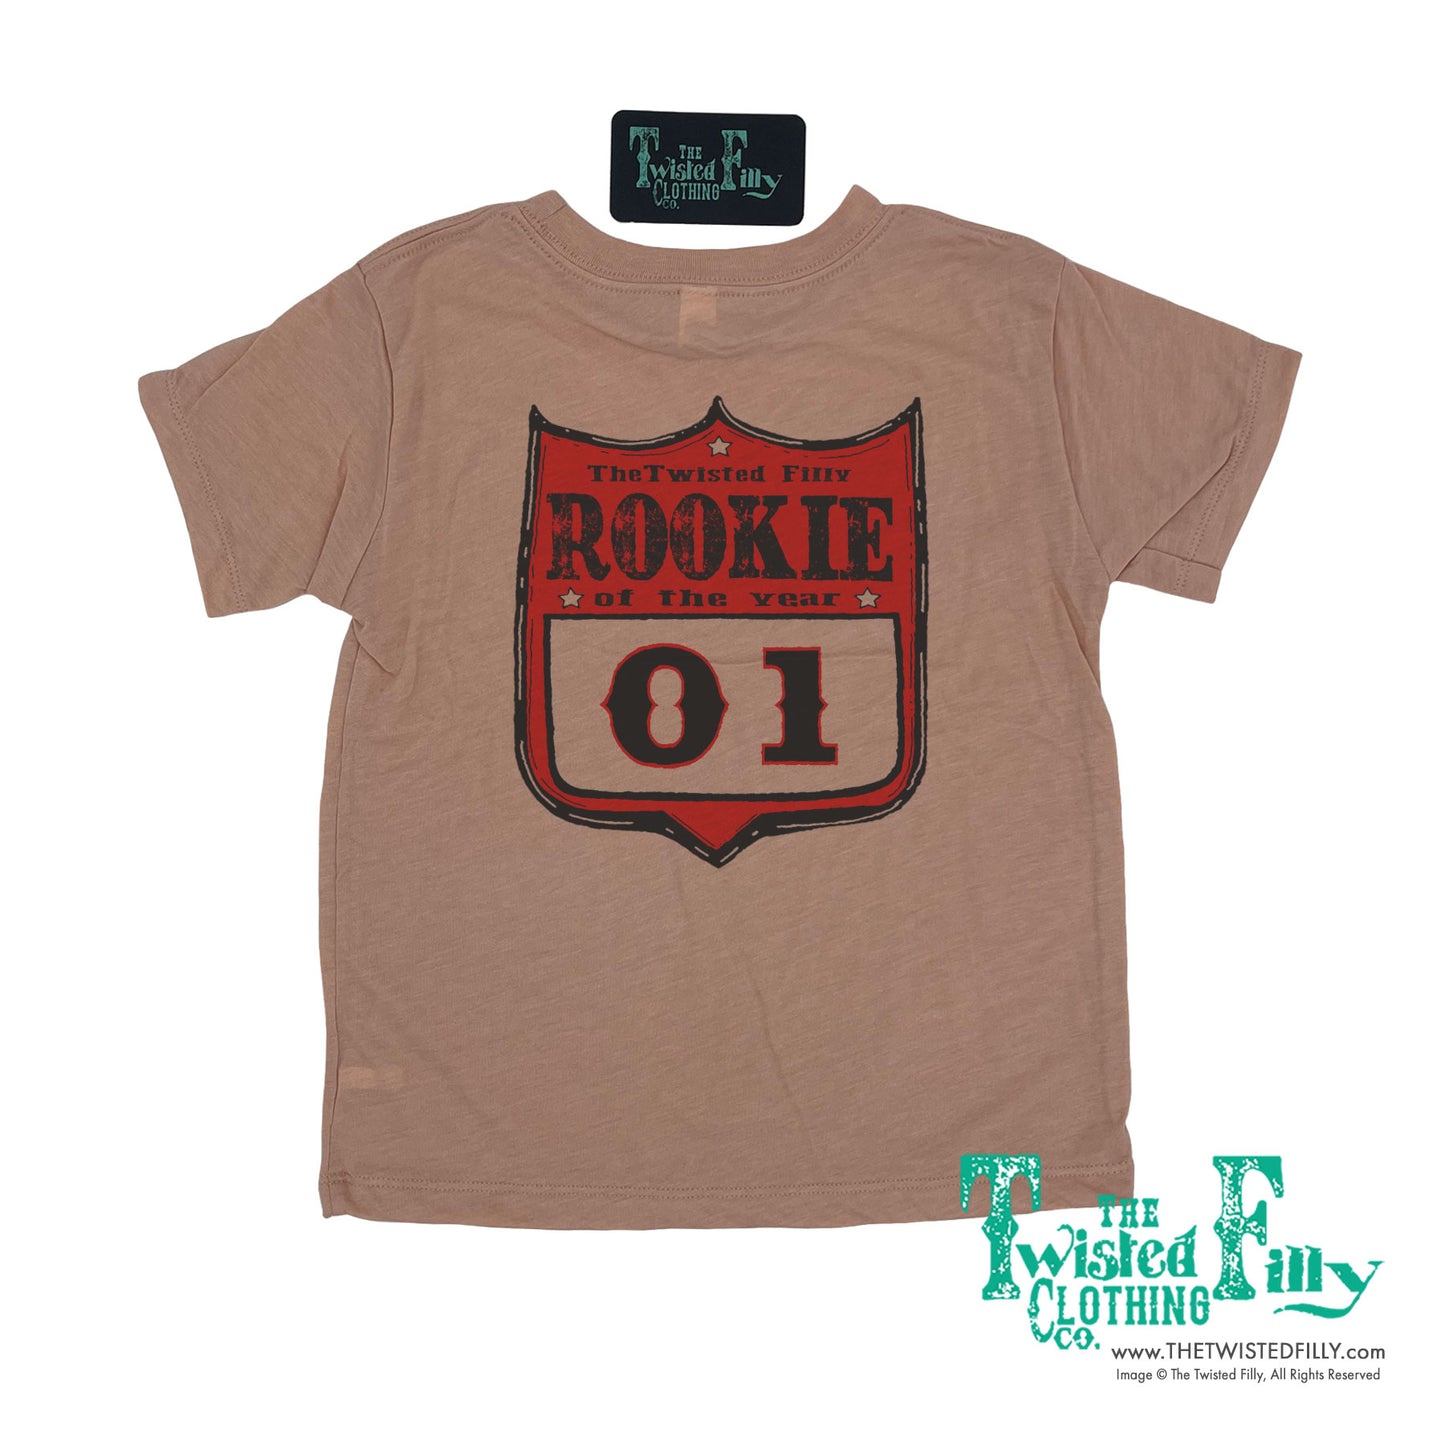 Rookie Of The Year Rodeo Back Number - S/S Infant Tee